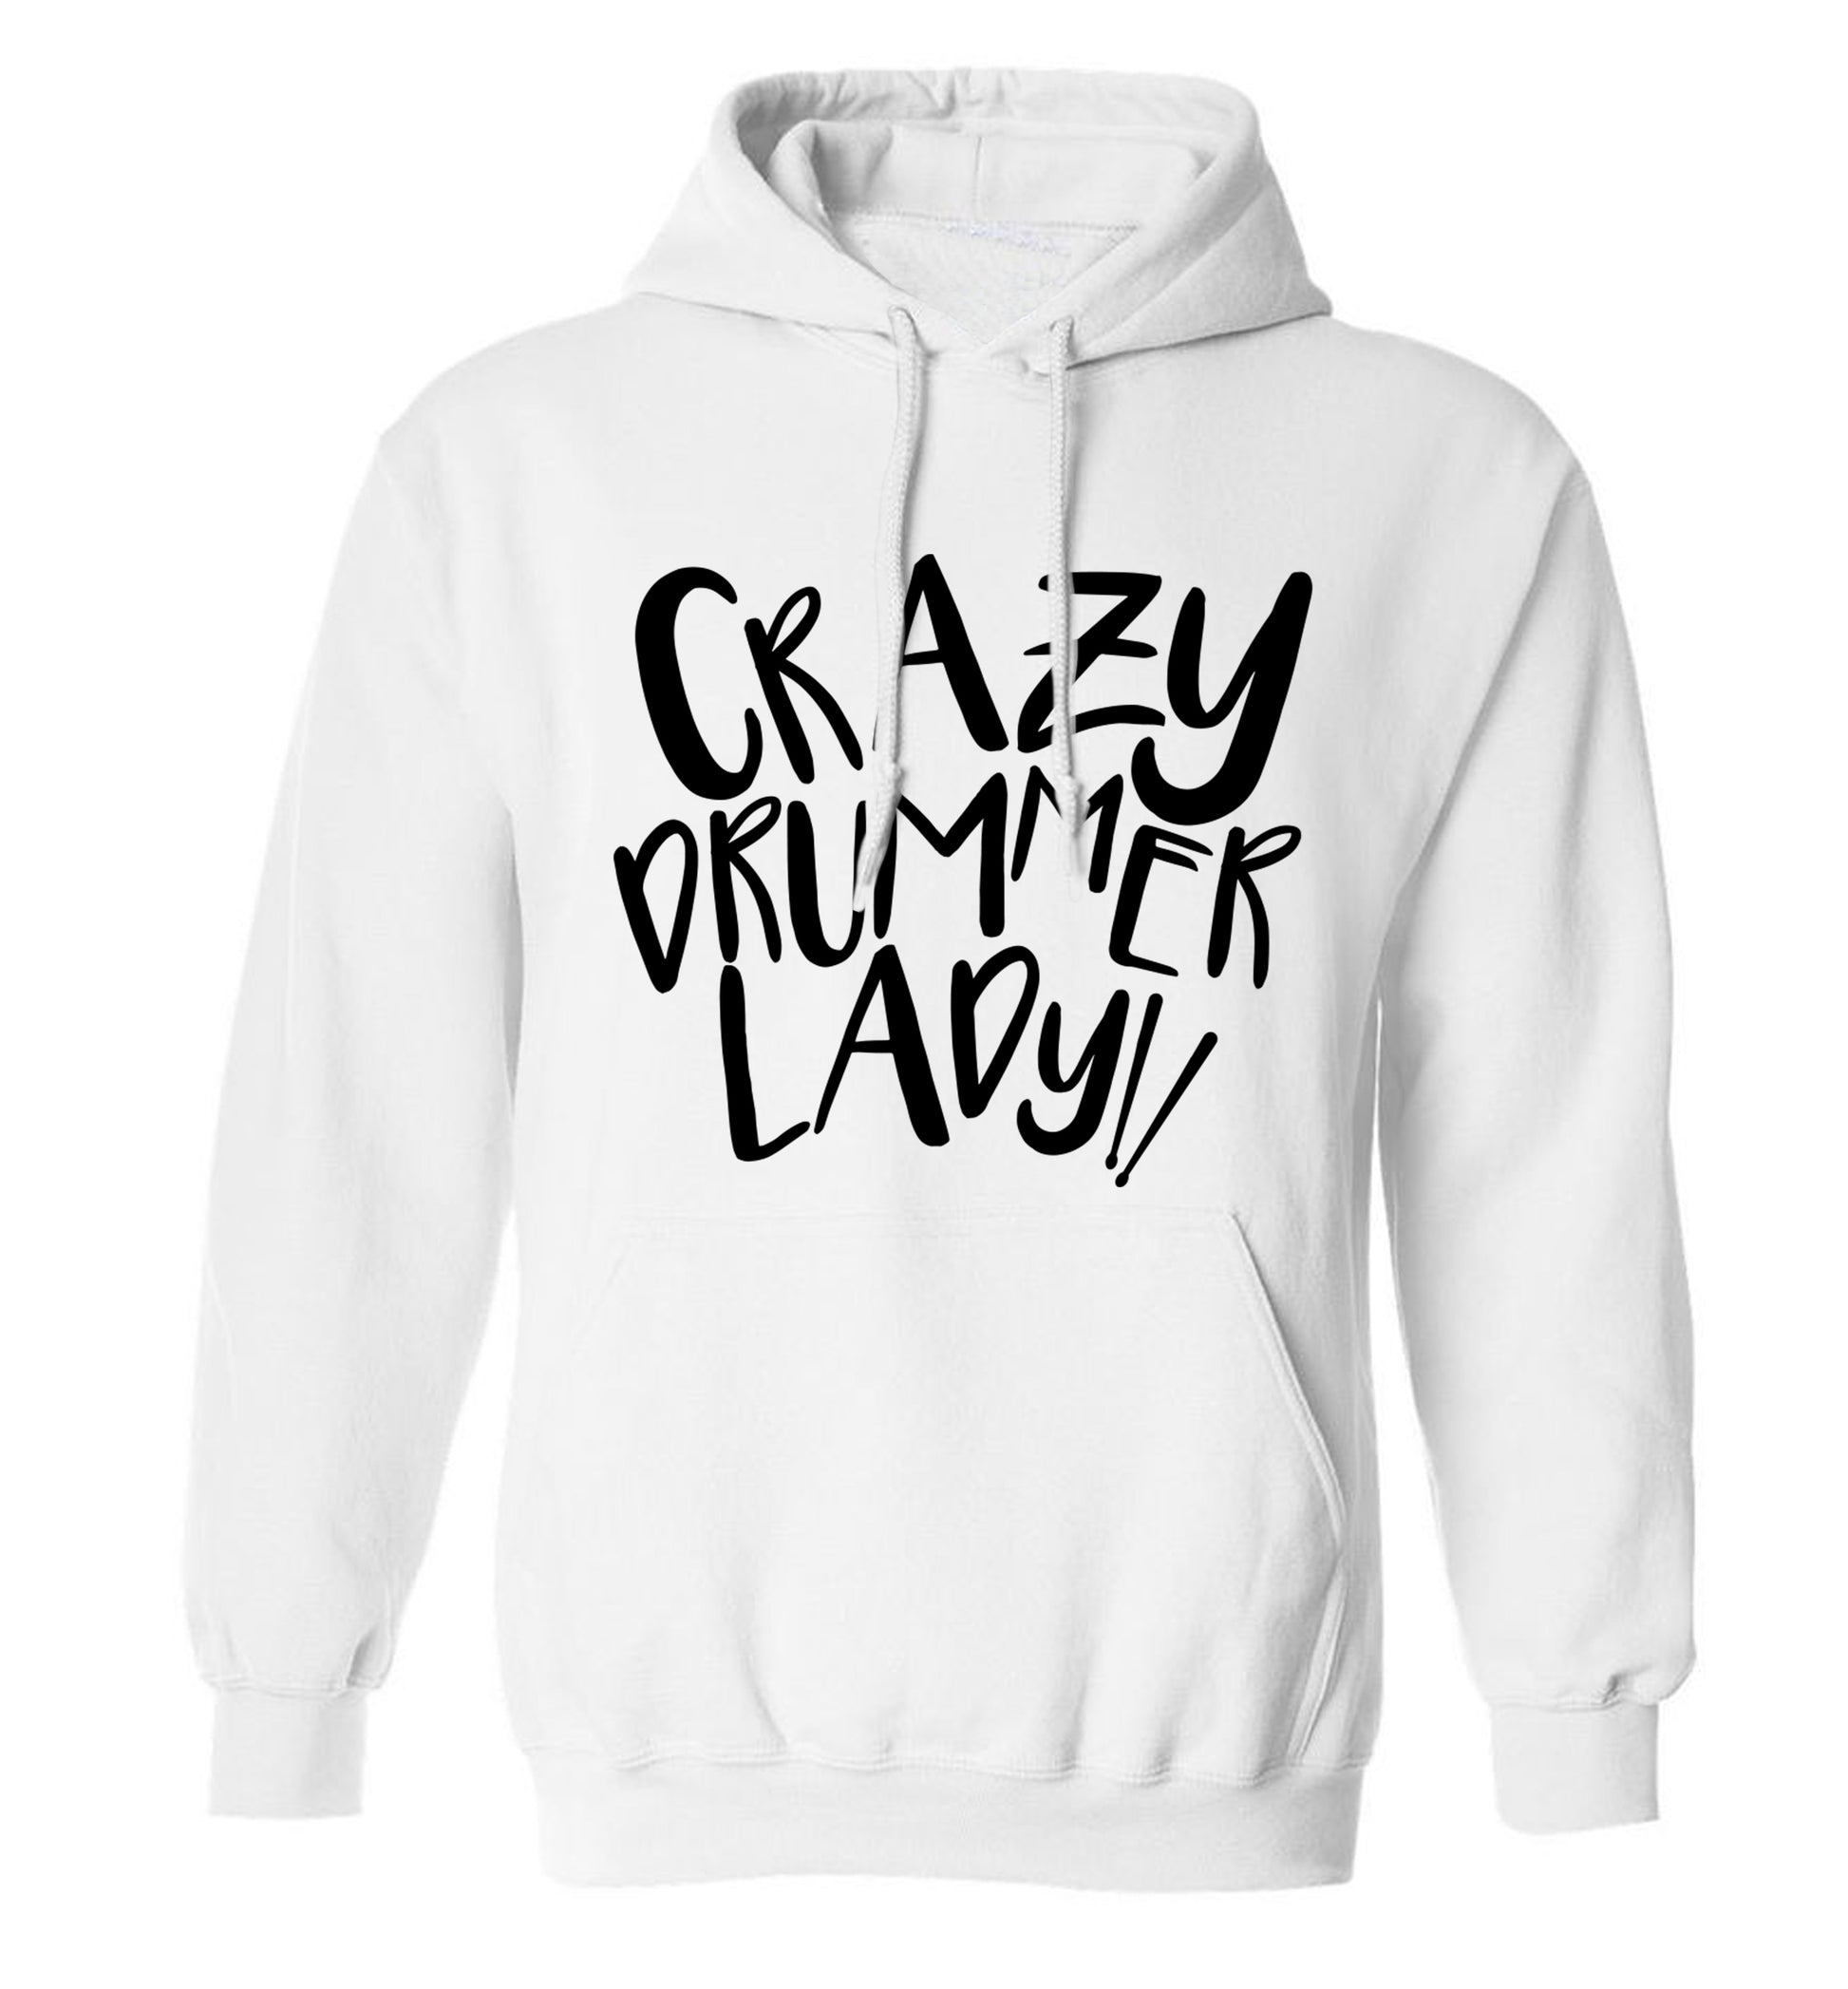 Crazy drummer lady adults unisex white hoodie 2XL